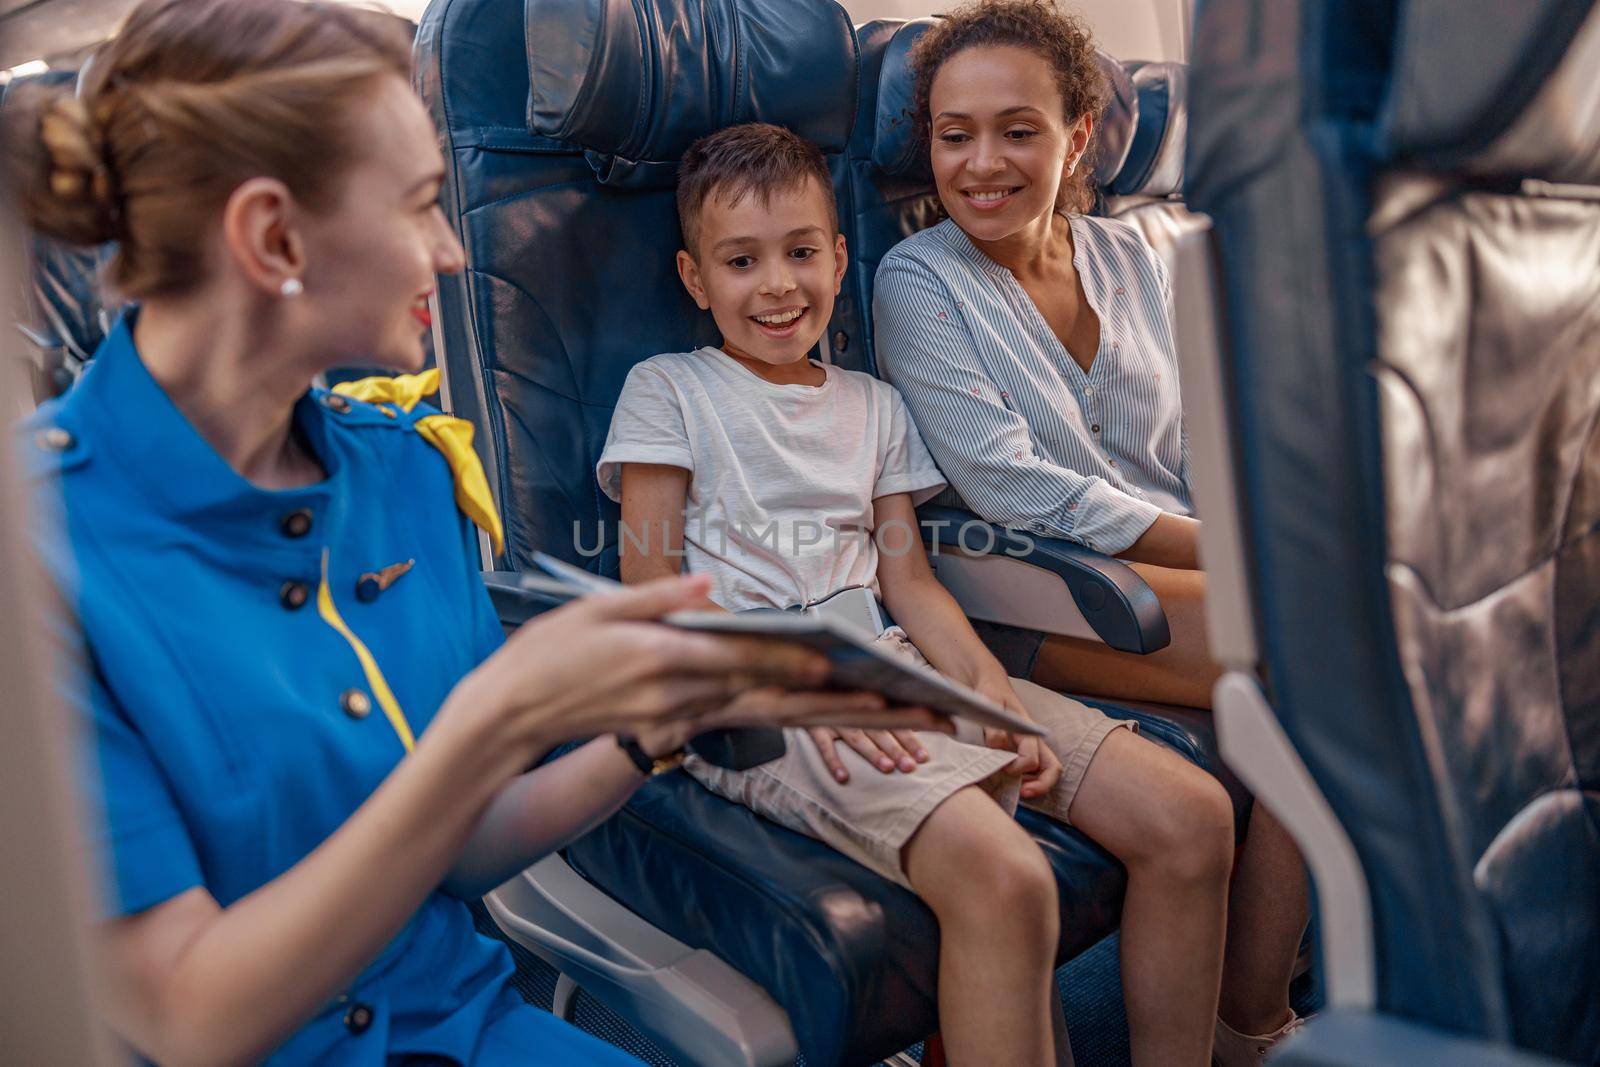 Female air hostess trying to entertain a kid on the plane by offering a book to read. Cabin crew provide service to family in airplane by Yaroslav_astakhov